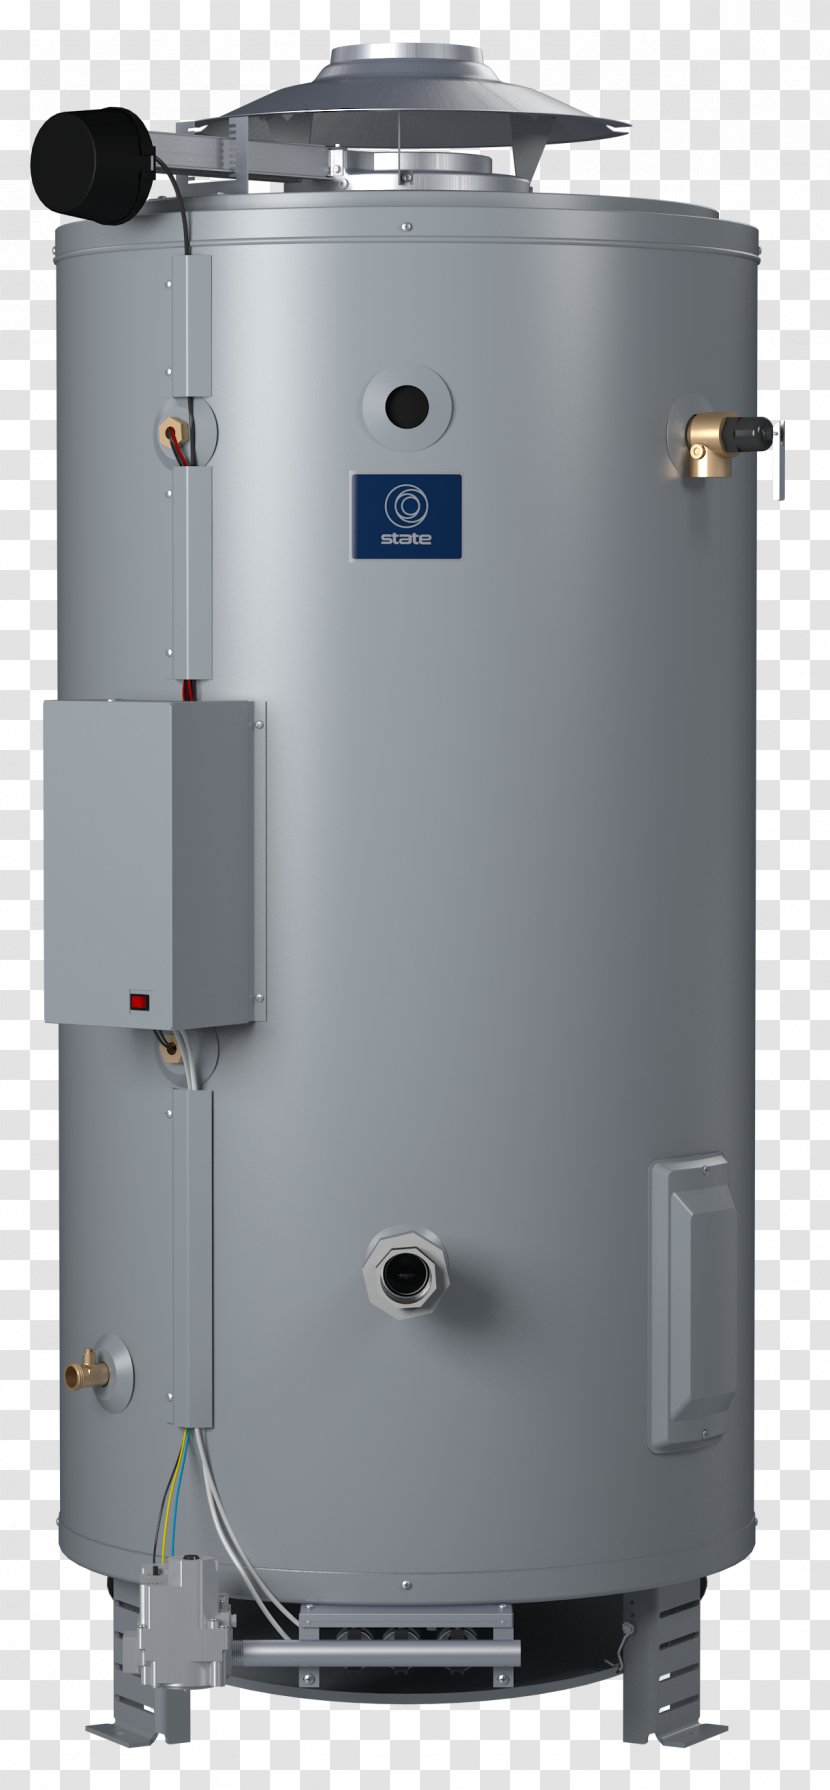 Water Heating A. O. Smith Products Company Natural Gas Heater Bradford White - Damper Transparent PNG